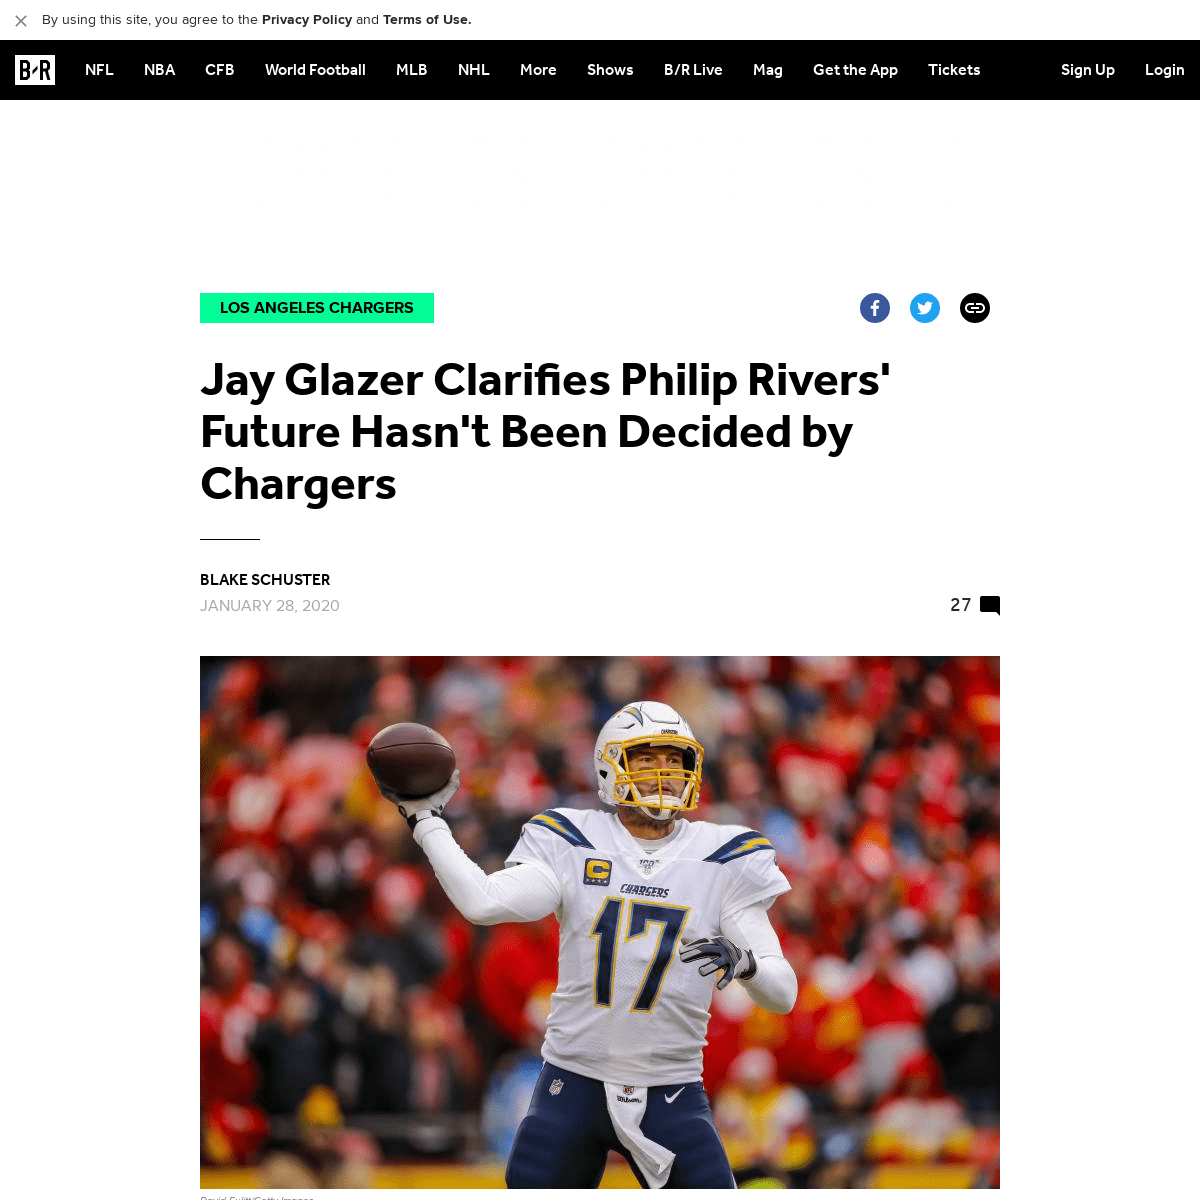 A complete backup of bleacherreport.com/articles/2873540-jay-glazer-clarifies-philip-rivers-future-hasnt-been-decided-by-charger